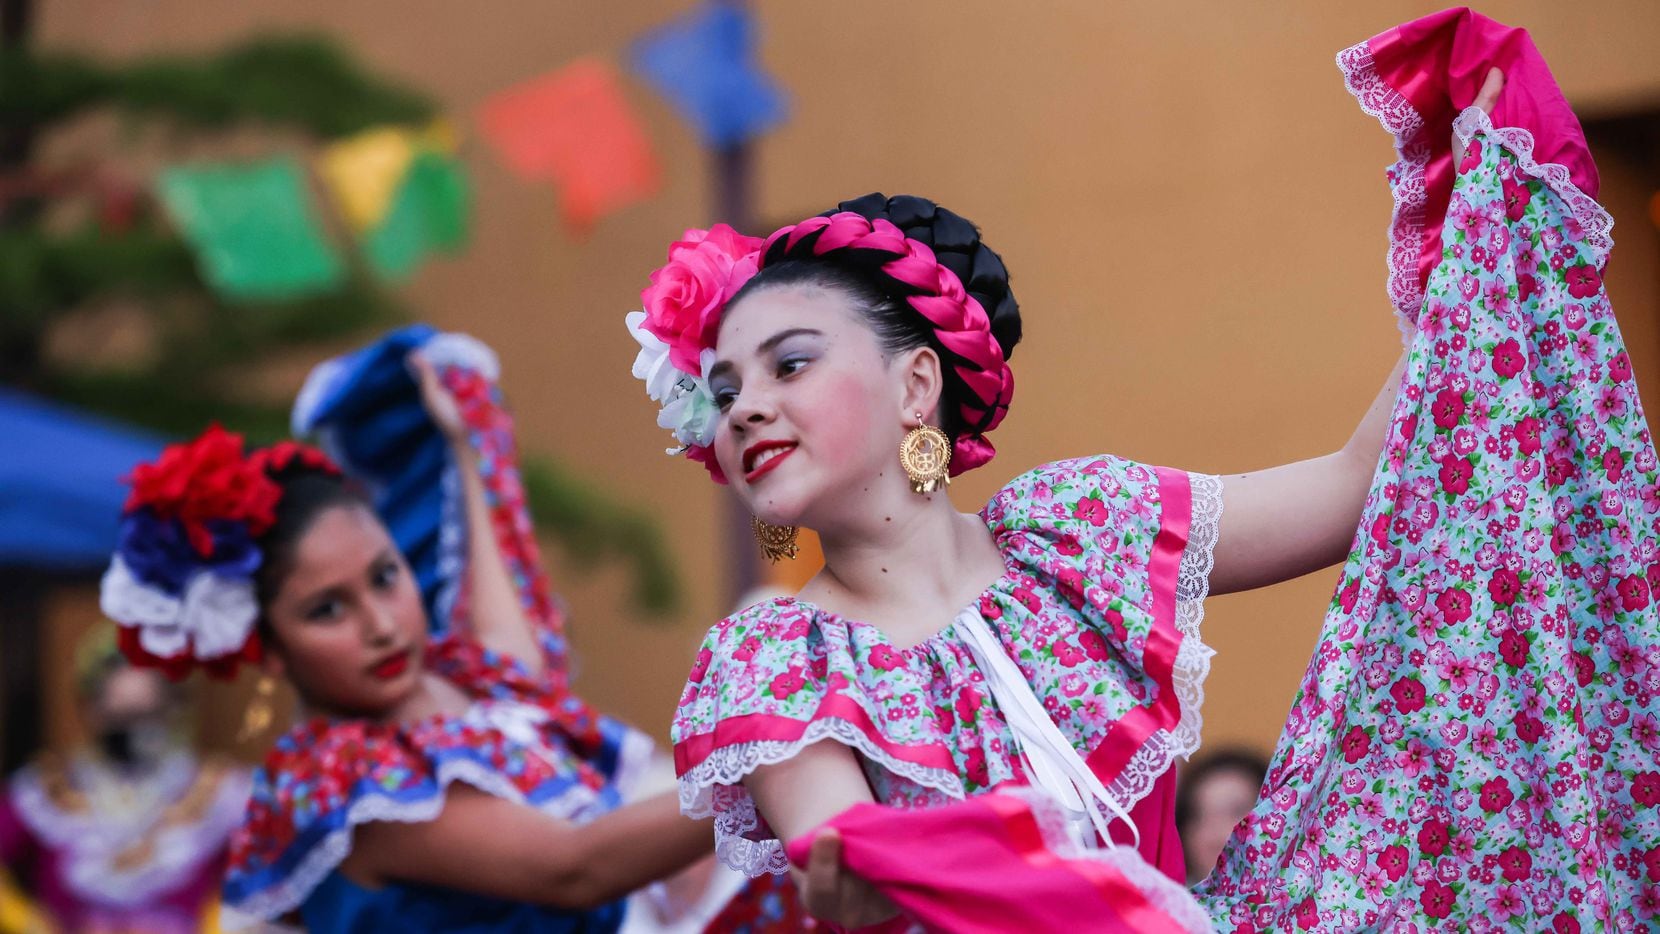 Enjoy ballet folklorico at a variety of events, including Flor, Canto y Grito at the Latino...